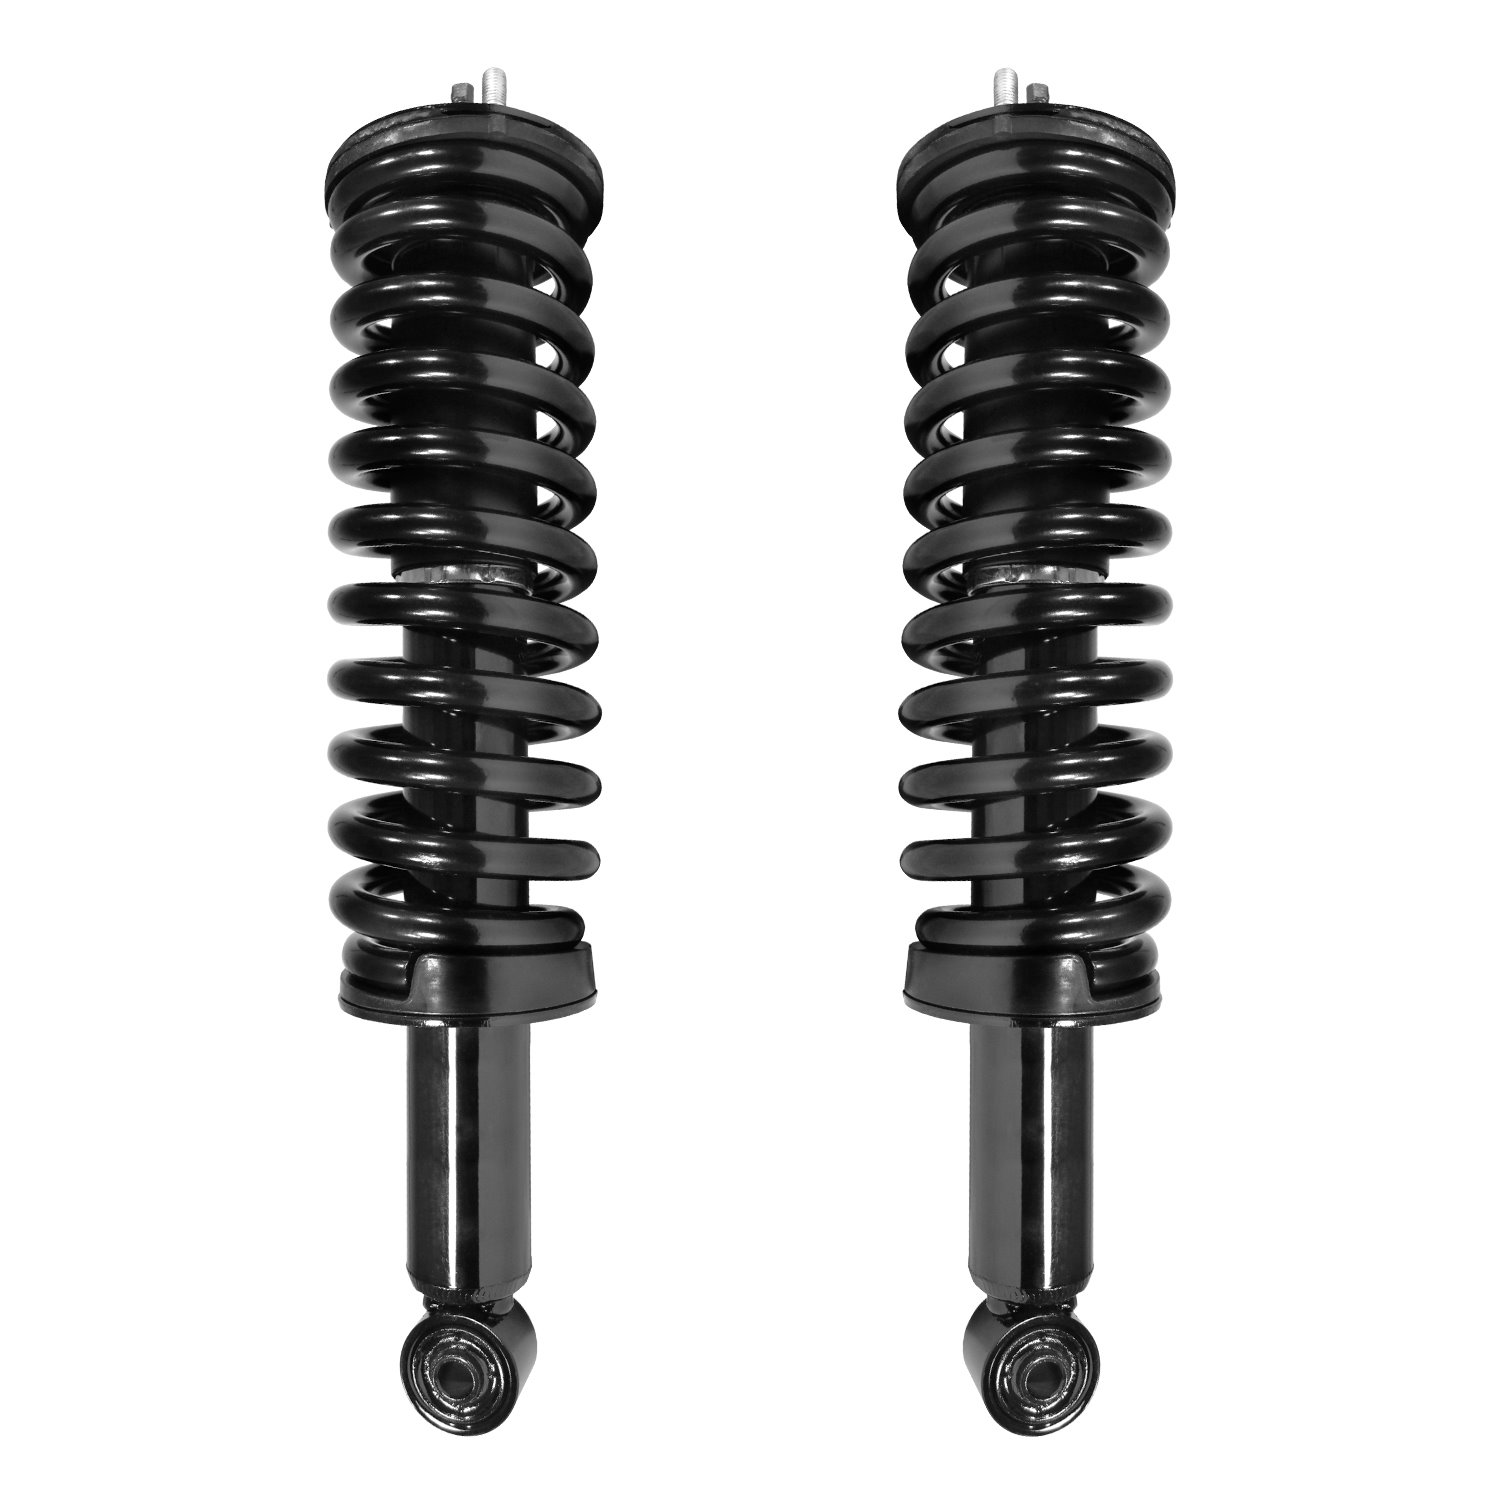 2-11081-11082-001 Suspension Strut & Coil Spring Assembly Set Fits Select Toyota Tacoma